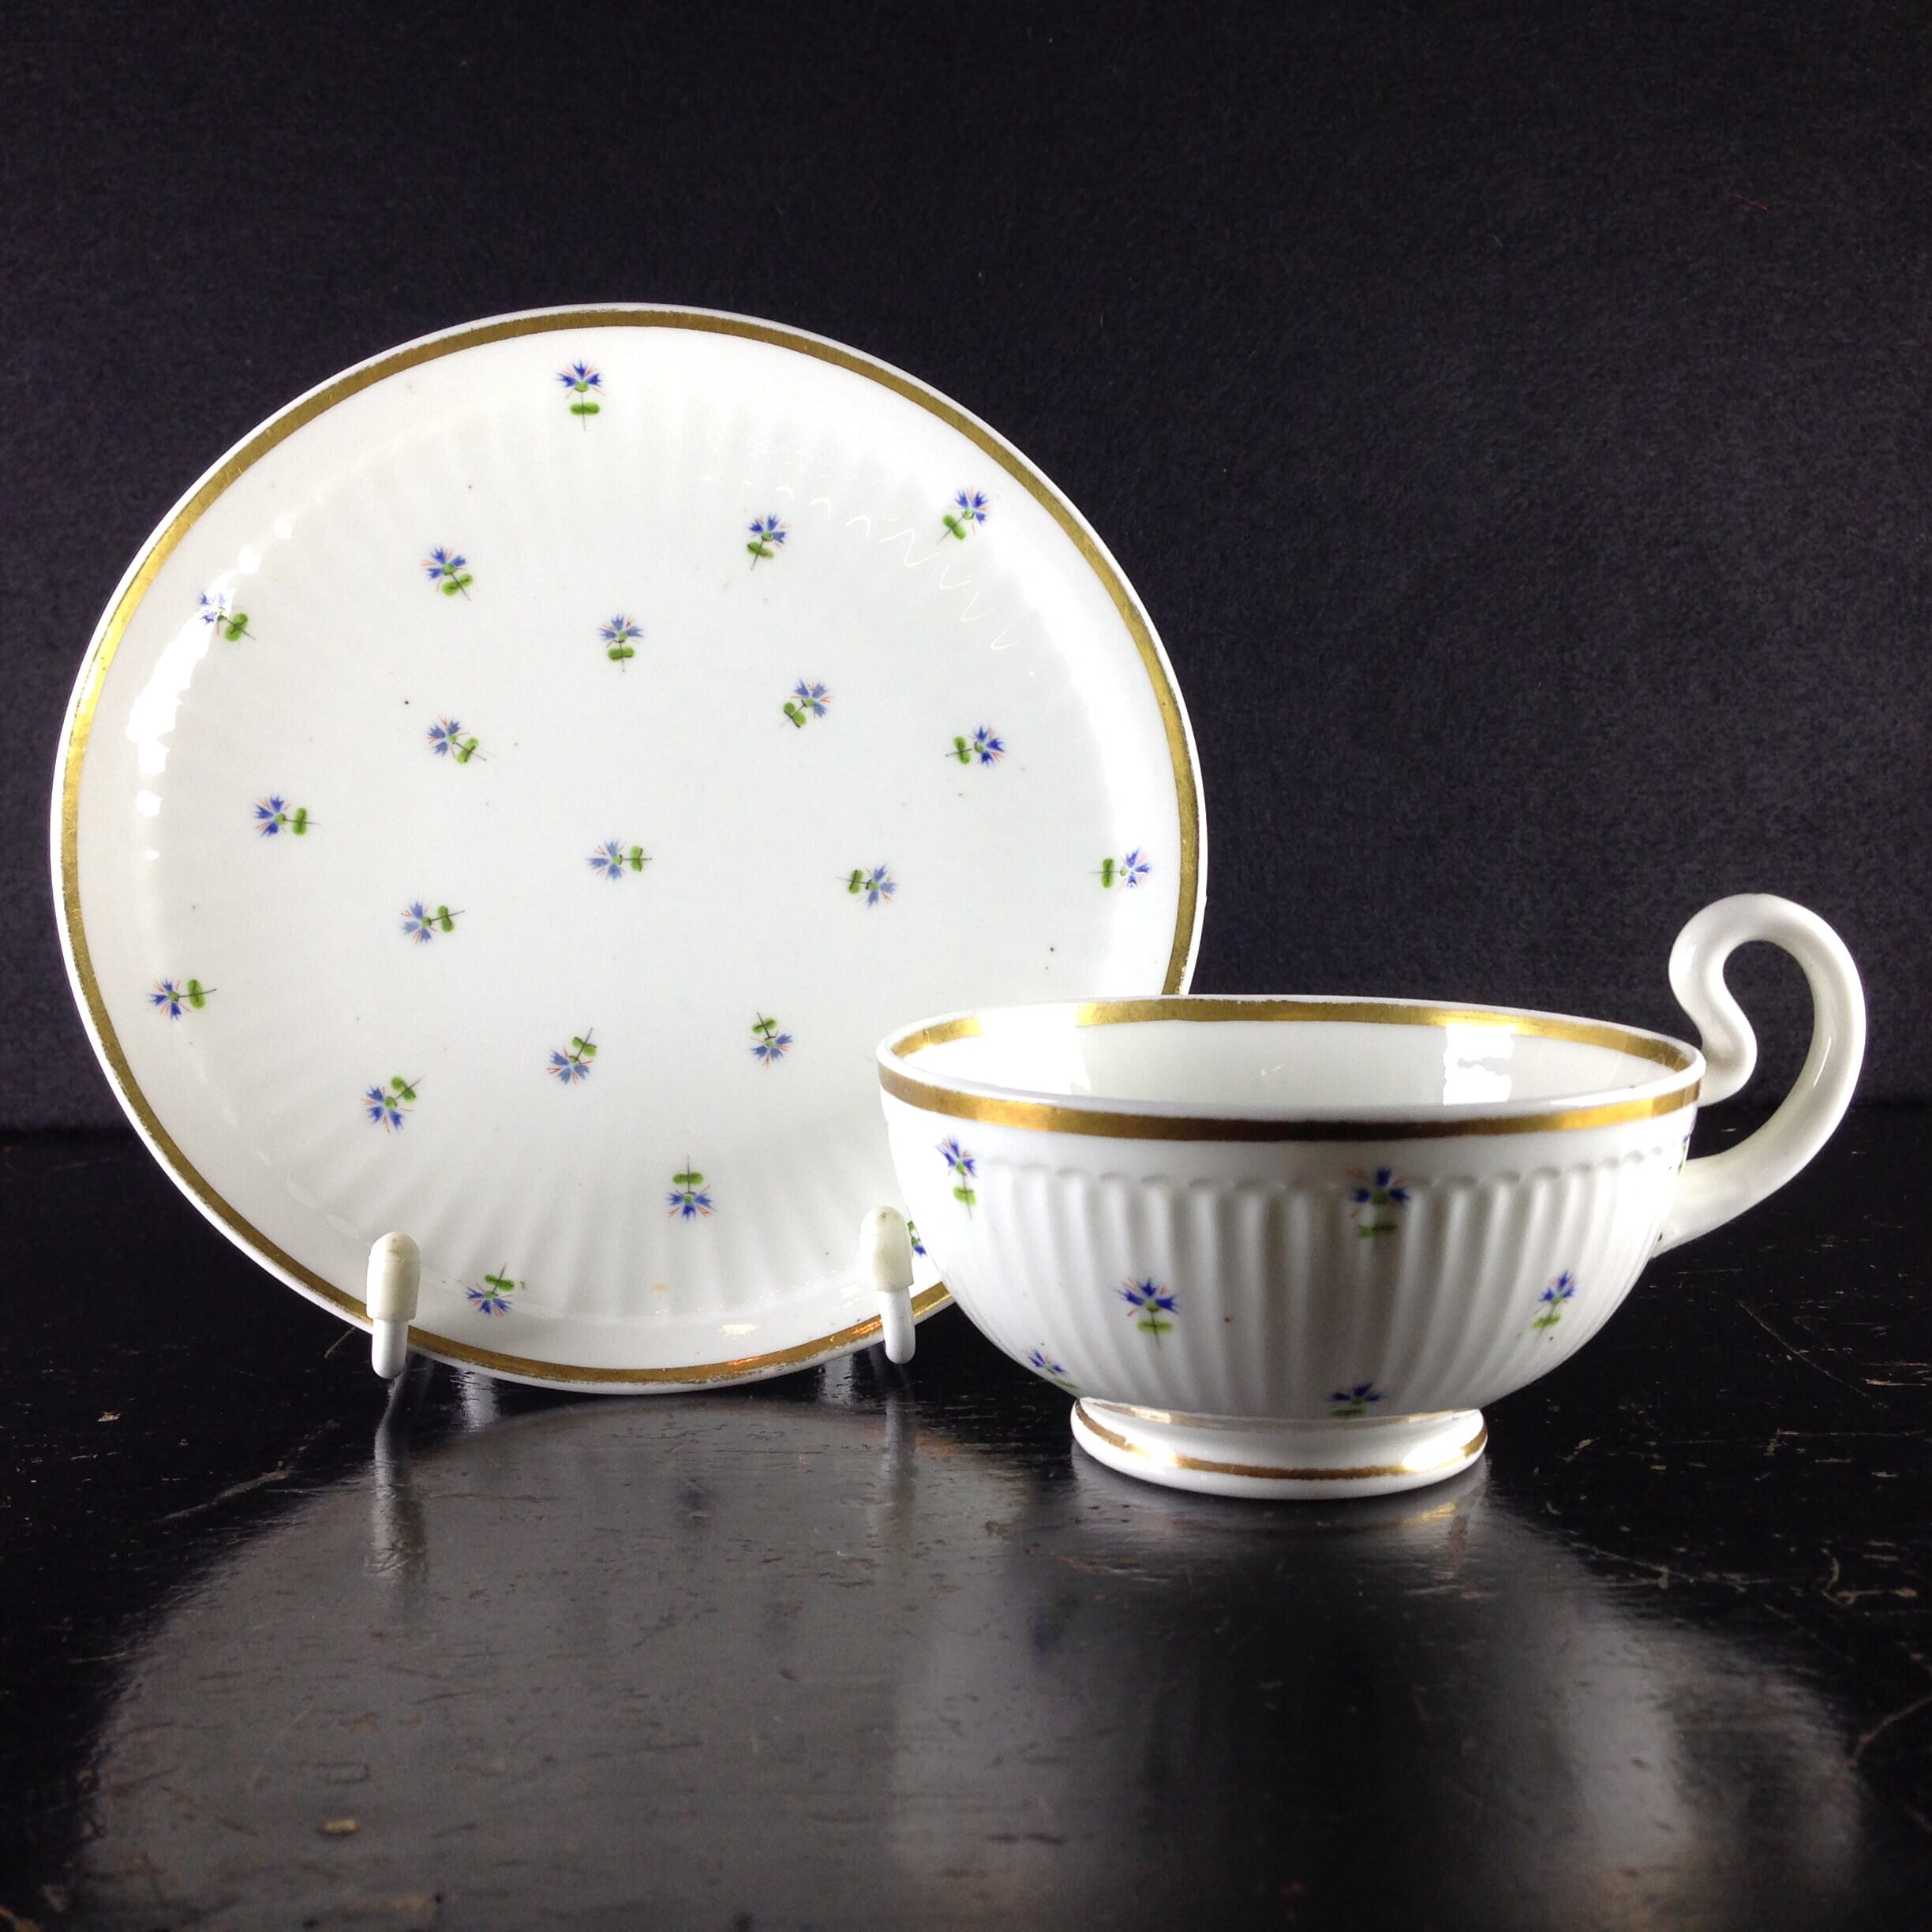 Swansea cup & saucer, French Flute pattern, c.1820. -0